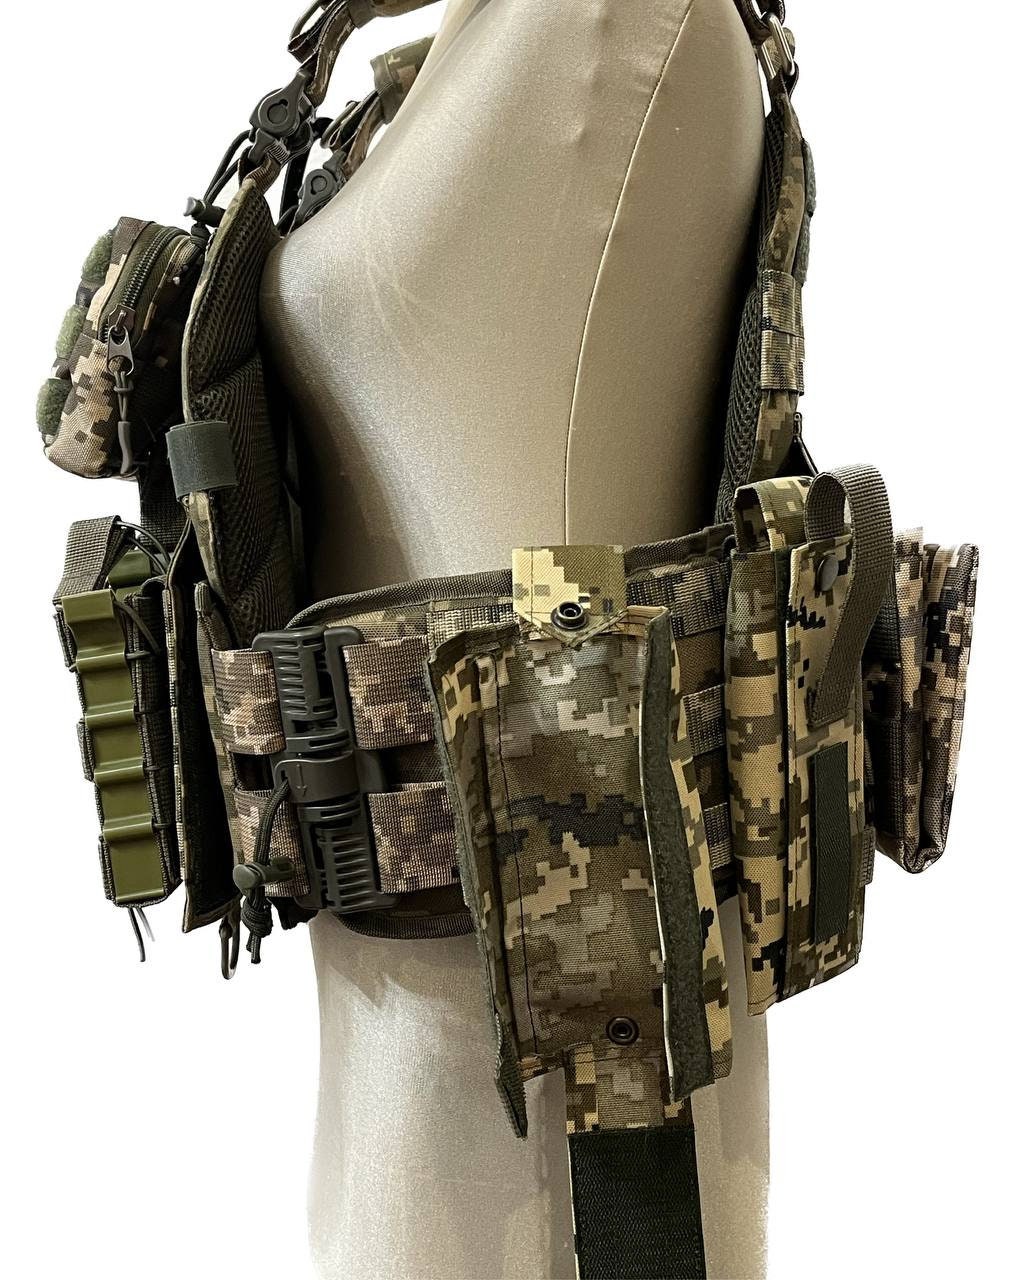 Ukrainian Military Body Armor Body Kit Kit Pouches All Included MM-14 ...